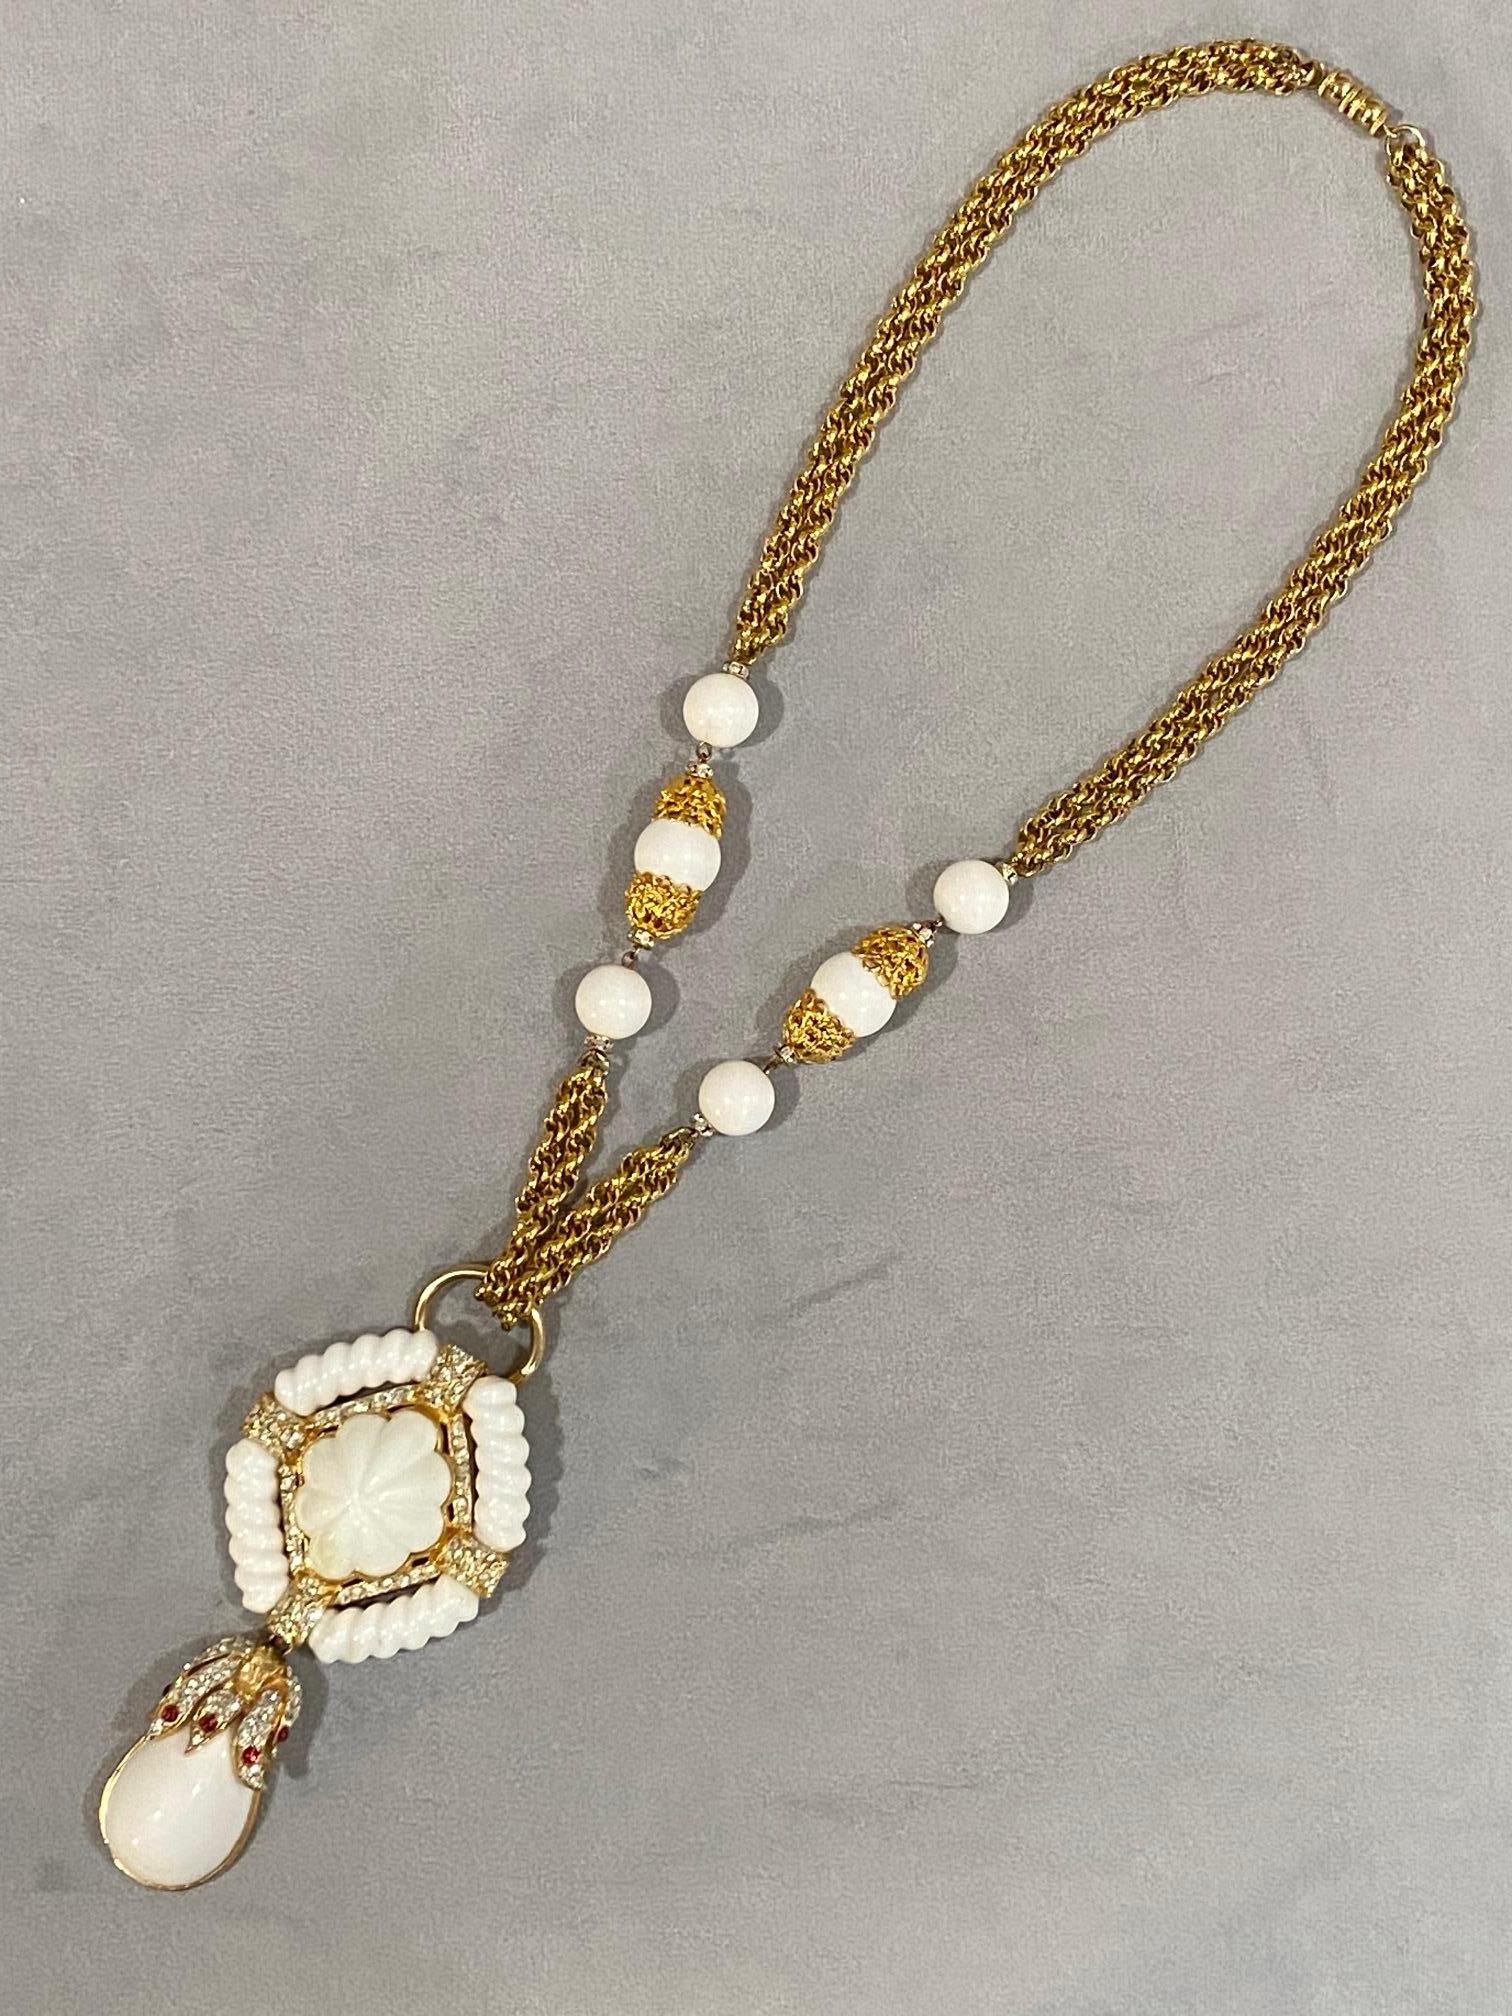 Women's or Men's Les Bernard 1980s Pendant Necklace in Gold & White with Rhinestone Accent For Sale